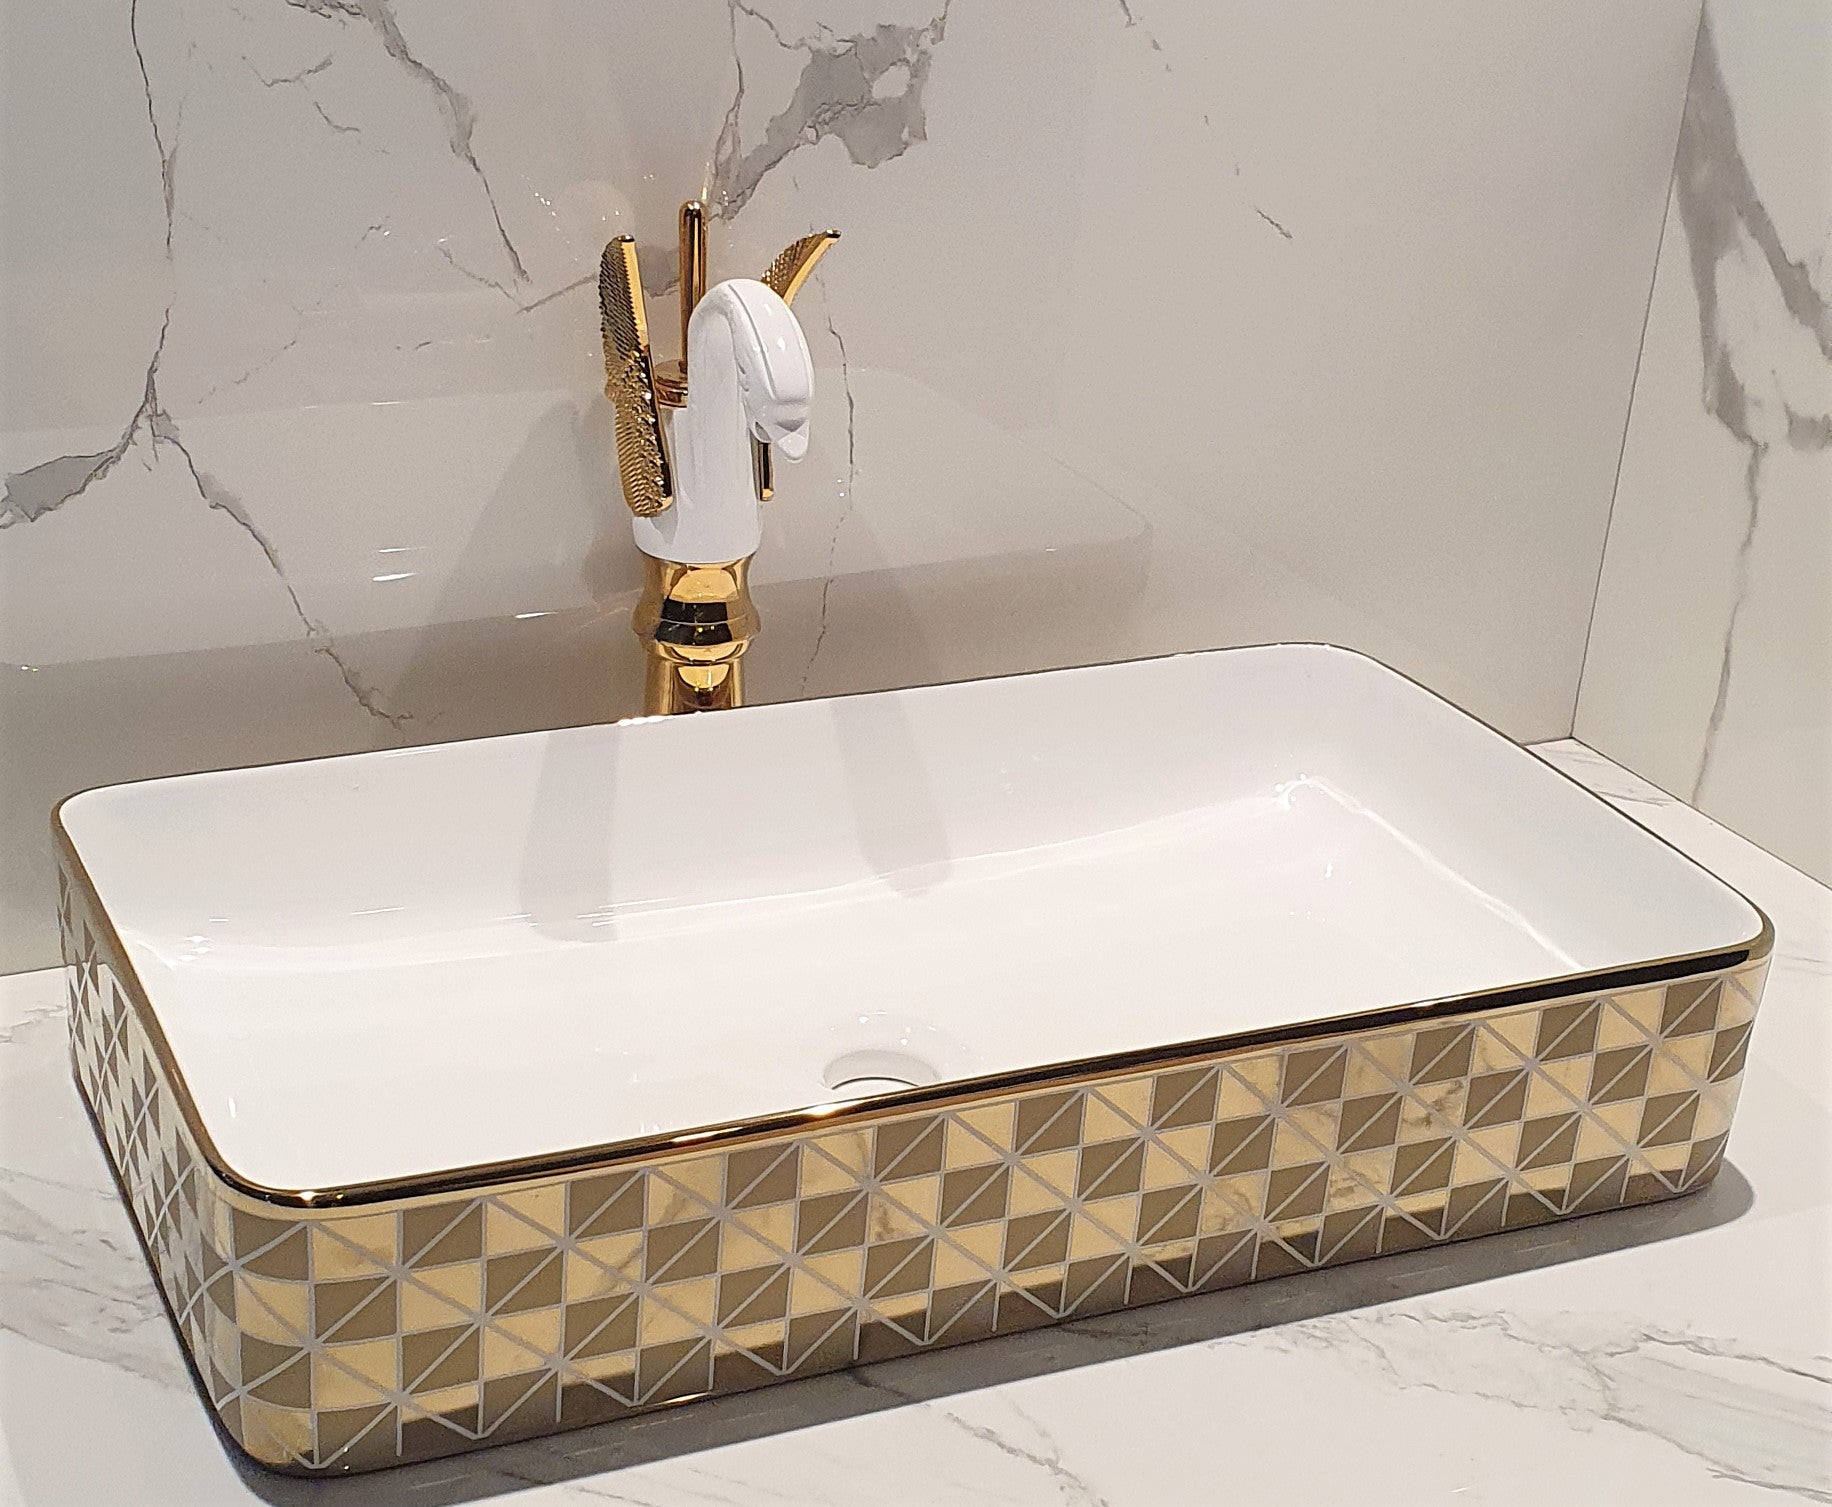 B Backline Ceramic Table Top, Counter Top Wash Basin Gold 24 x 14 X 4.5 Inch